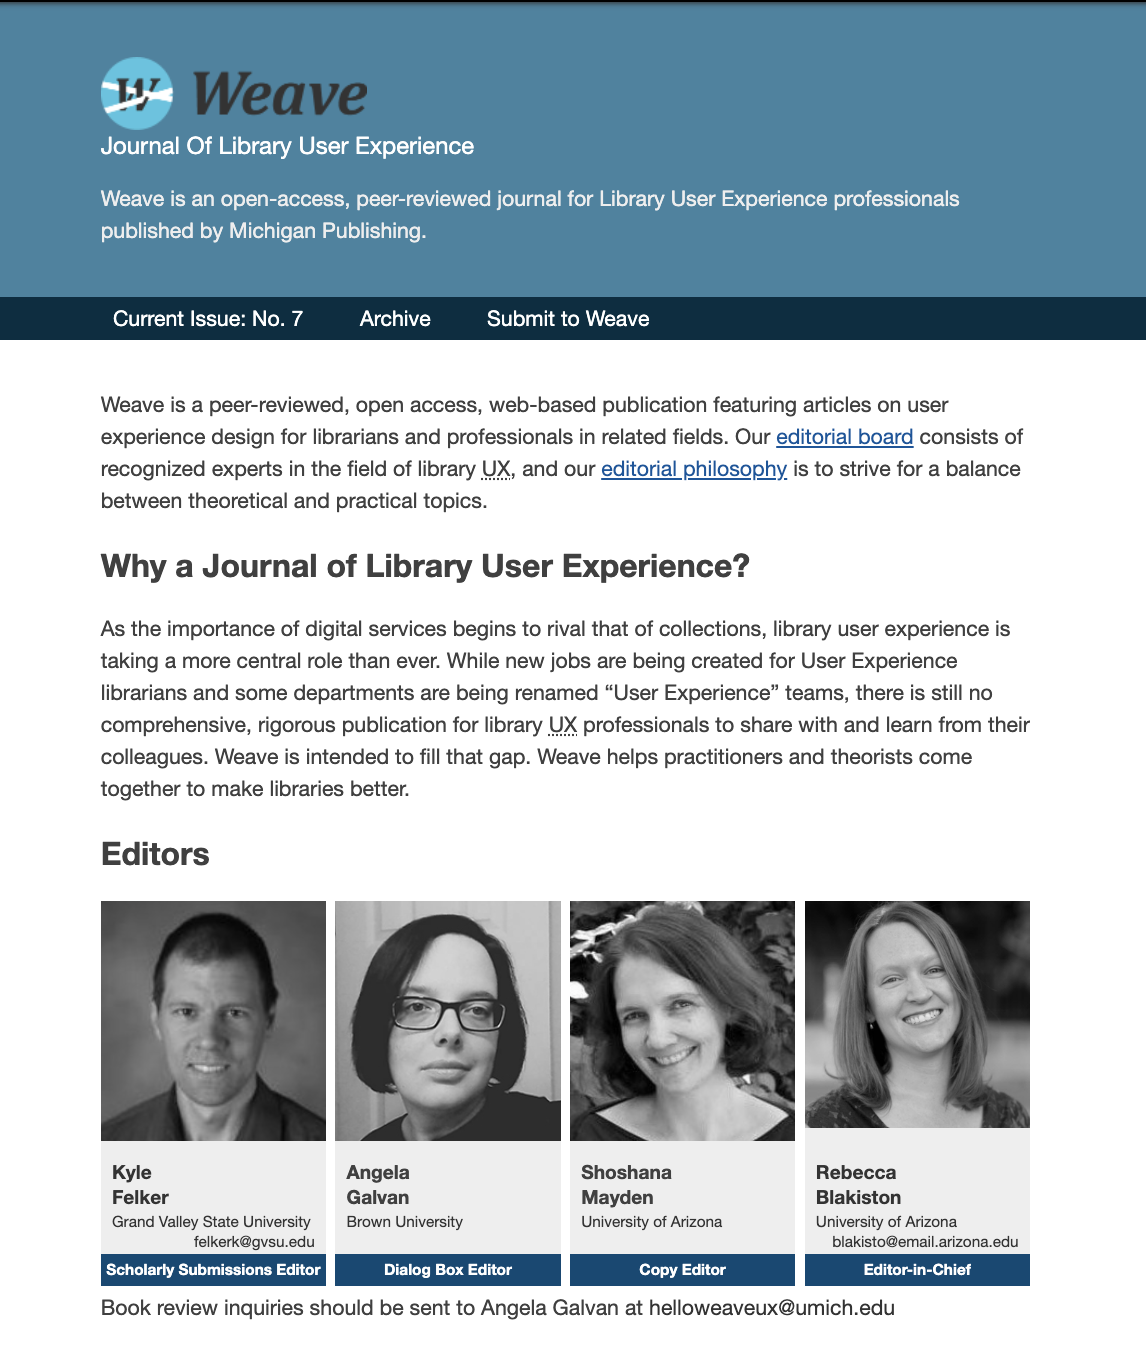 Weave: Journal of Library User Experience Website